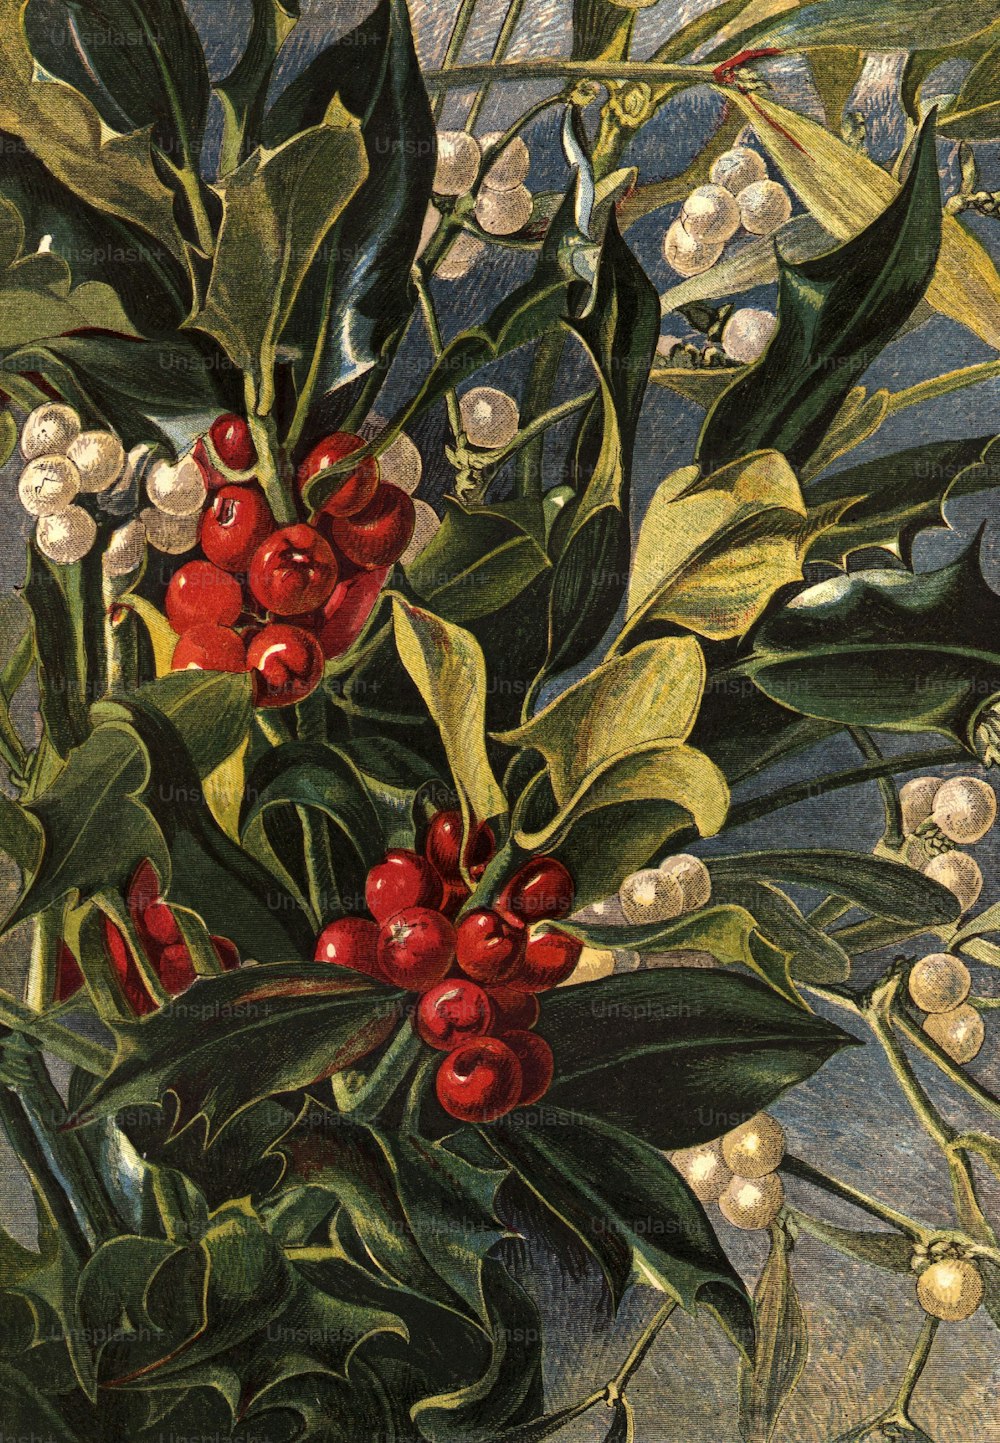 circa 1890:  Holly berries and mistletoe.  Leighton Brothers  (Photo by Hulton Archive/Getty Images)